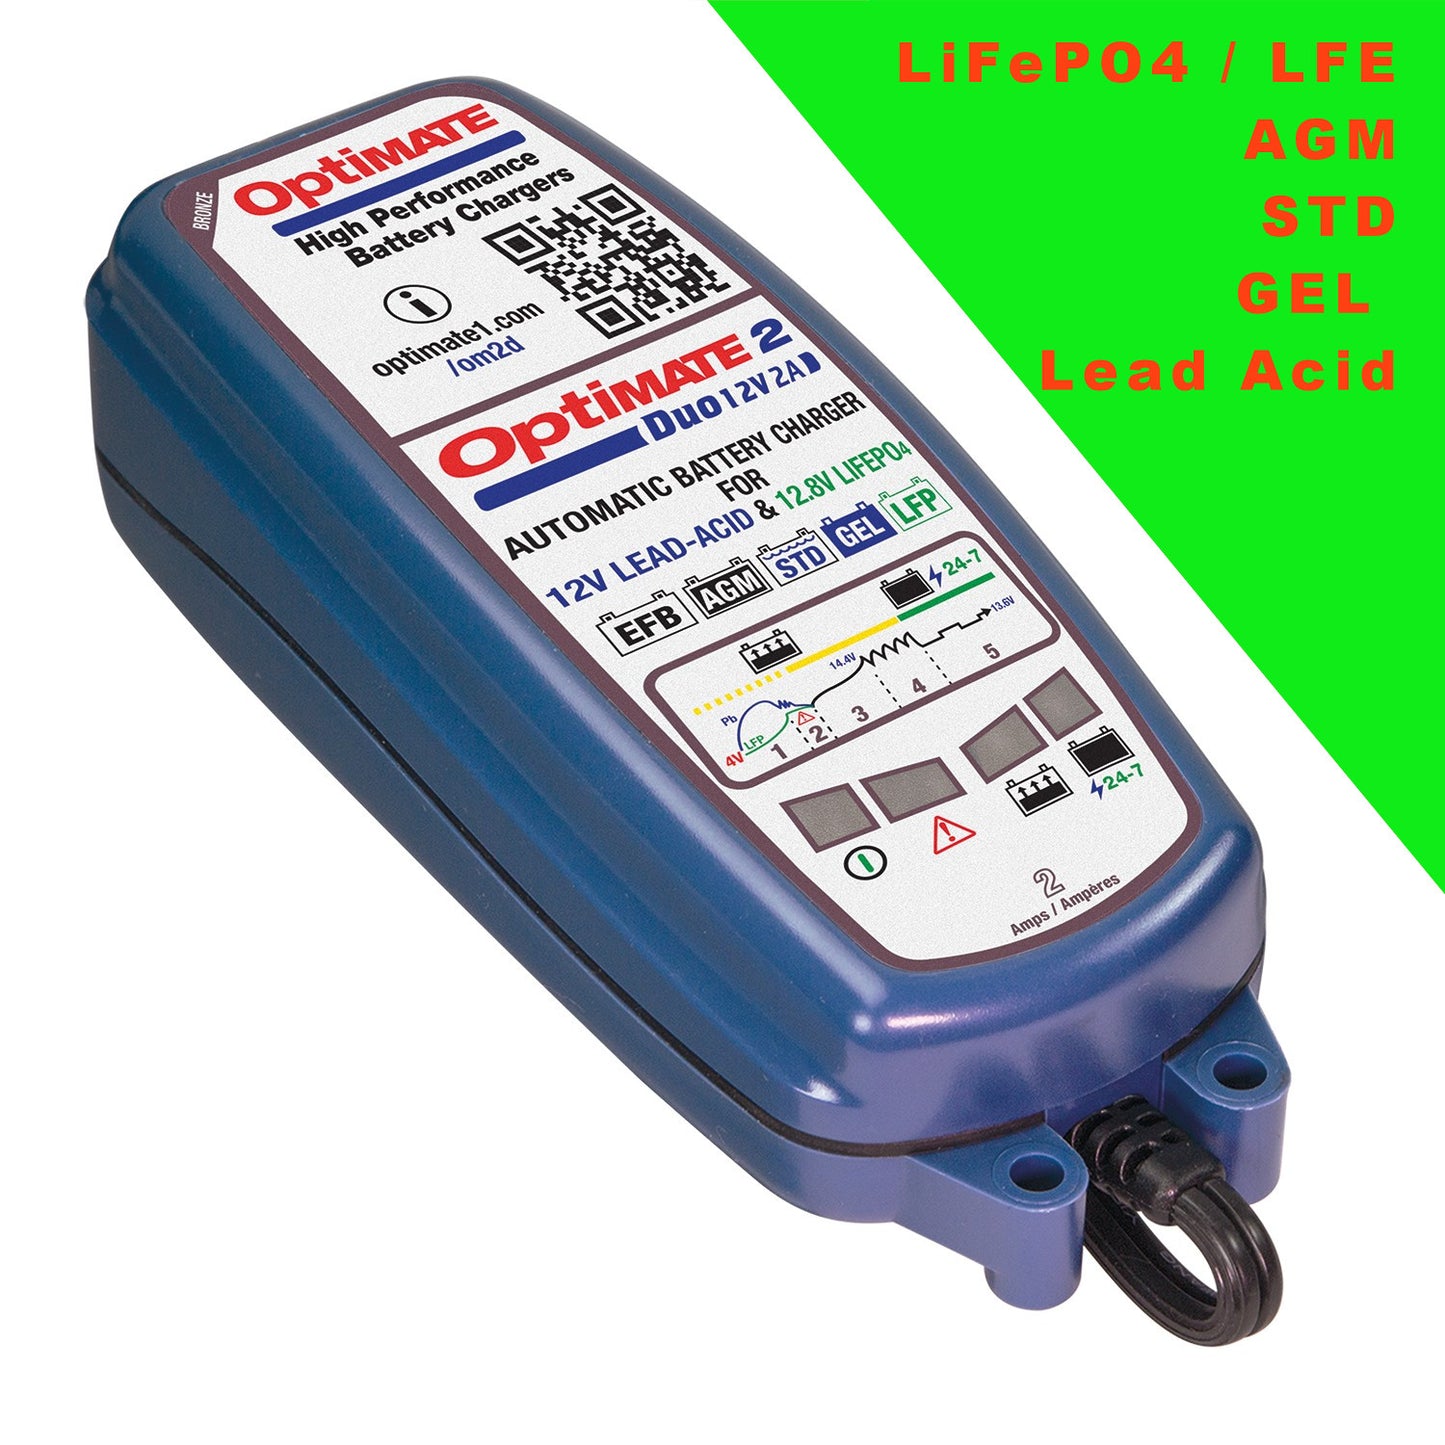 OptiMate 2 DUO Battery Charger Maintainer Lithium AND Lead Acid TM-558